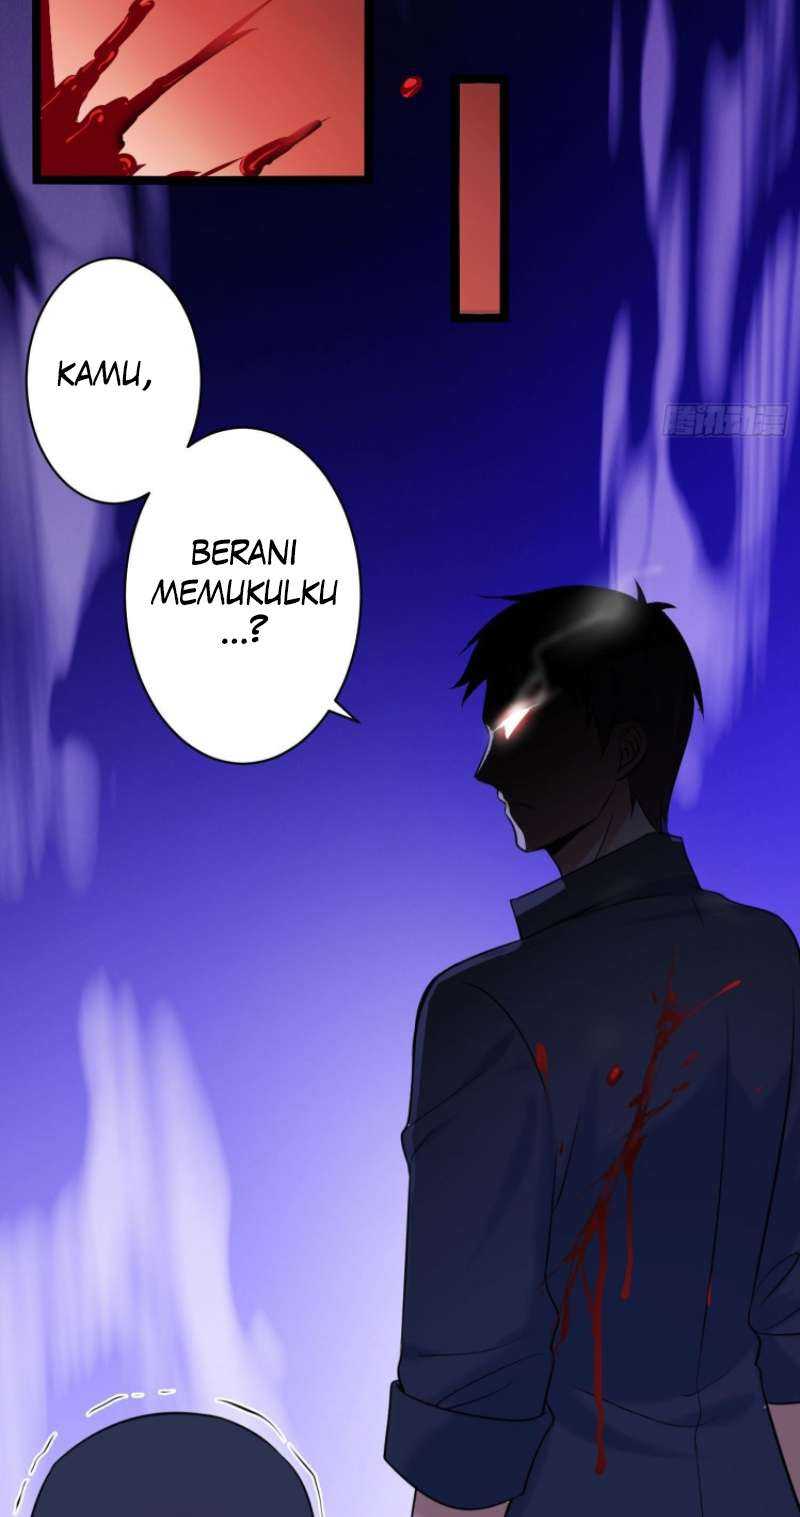 I Must Be Hero Chapter 3